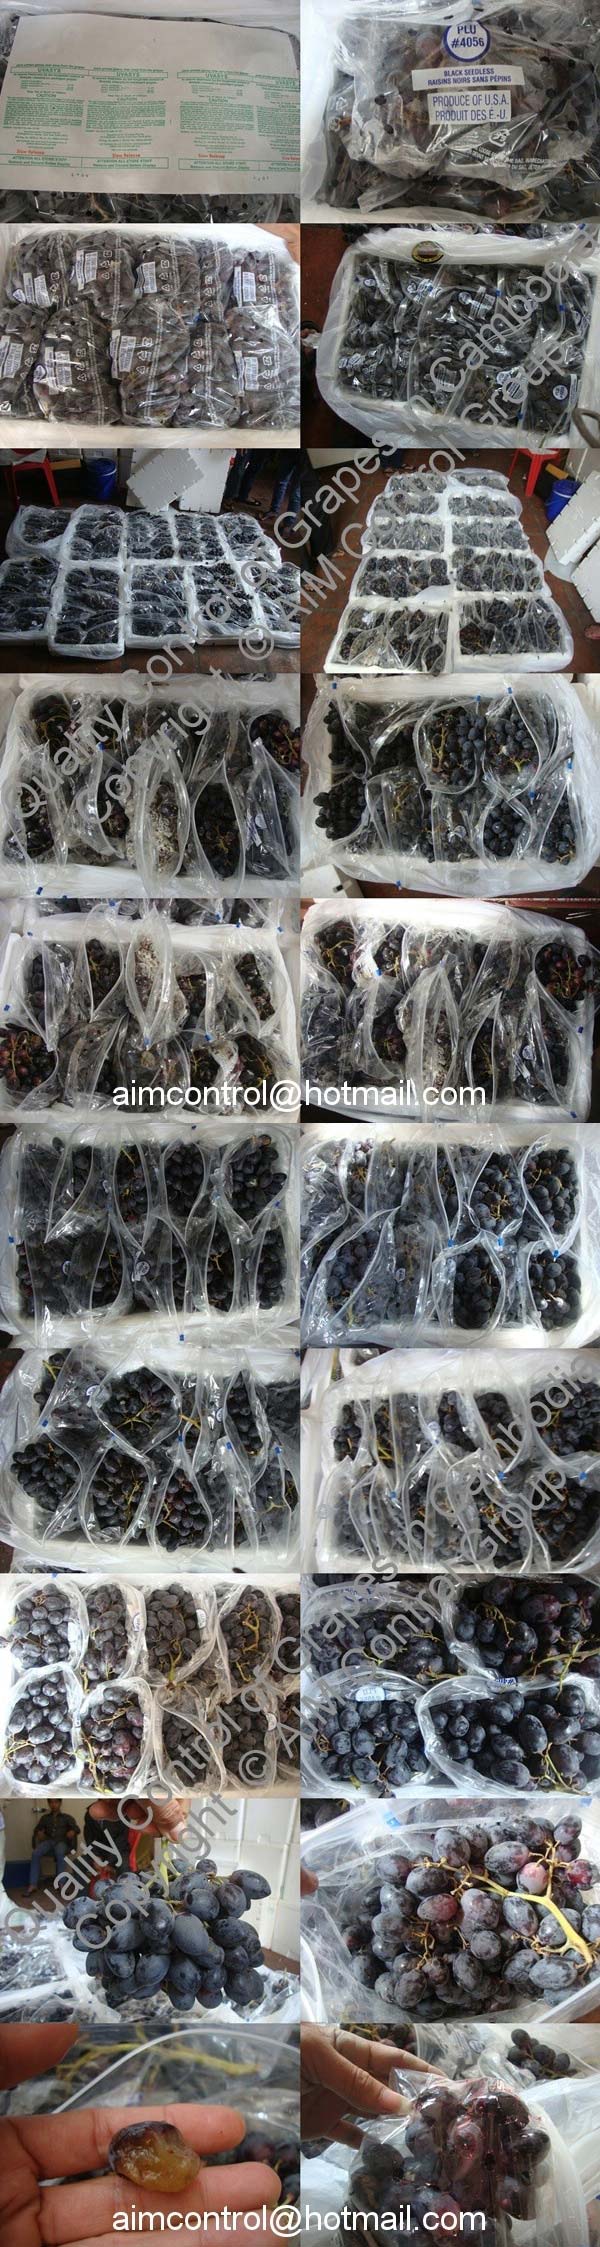 Fruit_inspection_vegetable_quality_control_claim_in_Asia